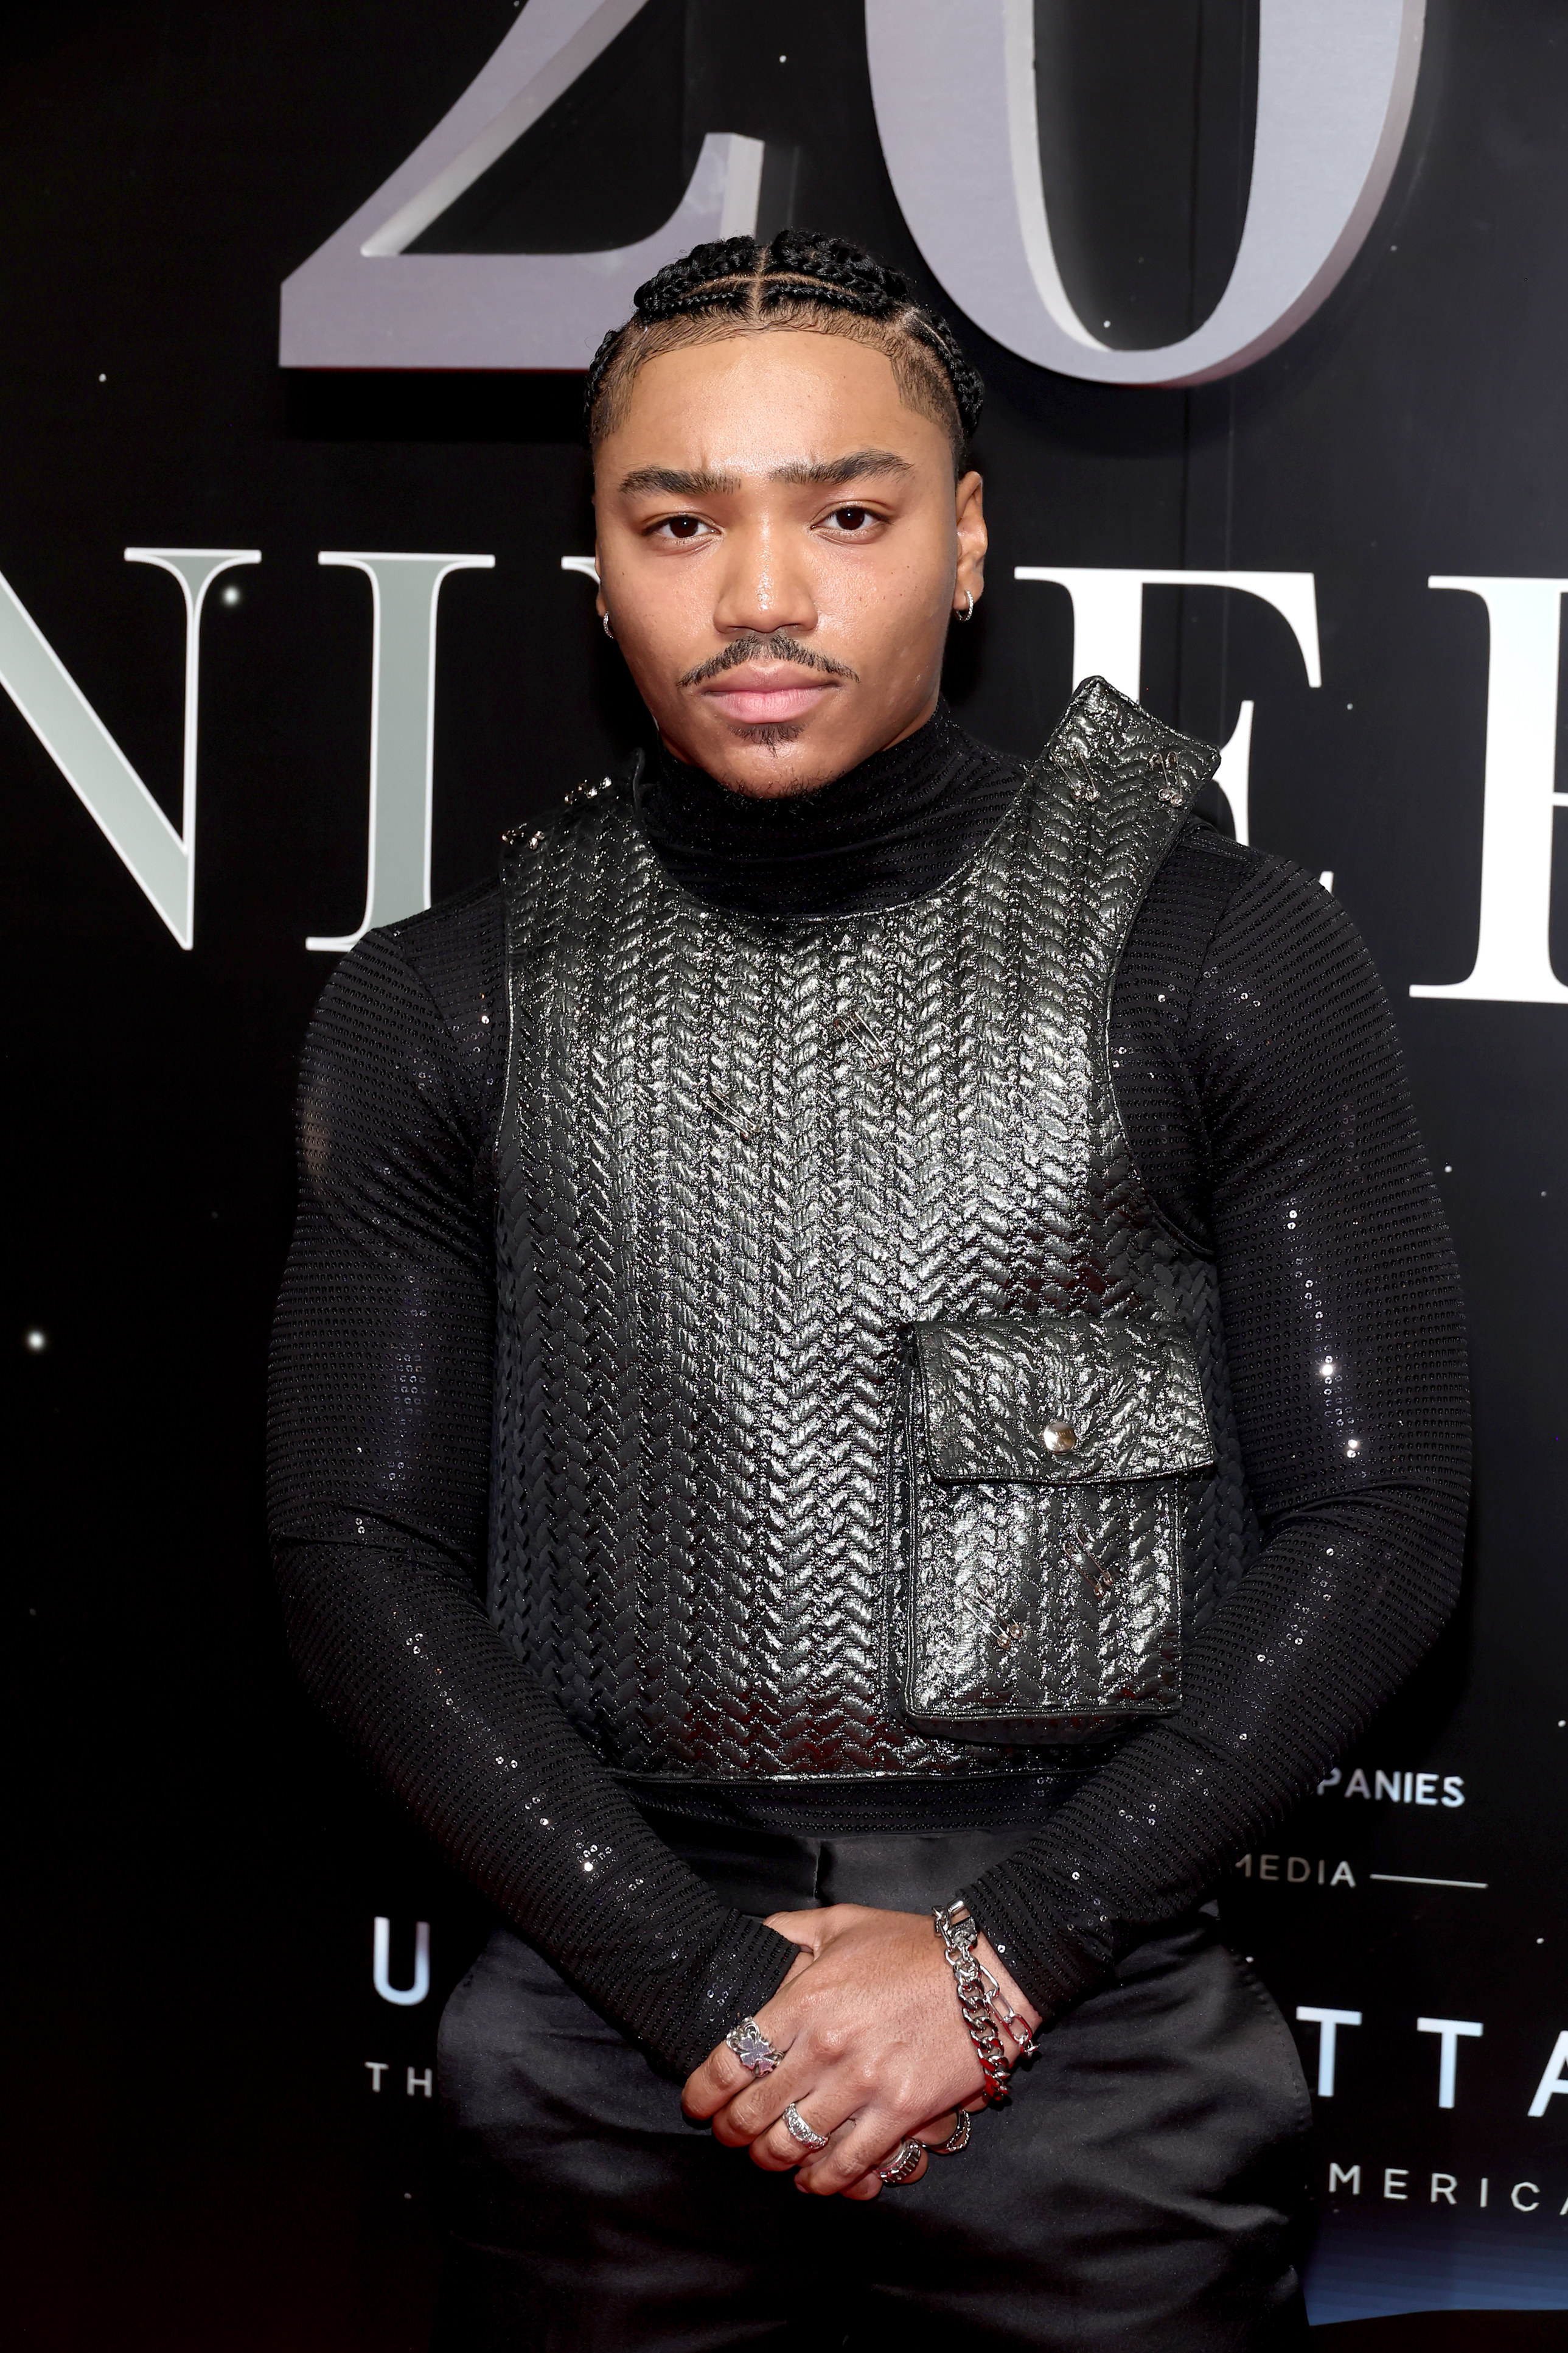 A close-up of Josh Levi posing for photographers on the red carpet. Josh is wearing a sequined long-sleeve shirt and a textured top that emulates a bulletproof vest